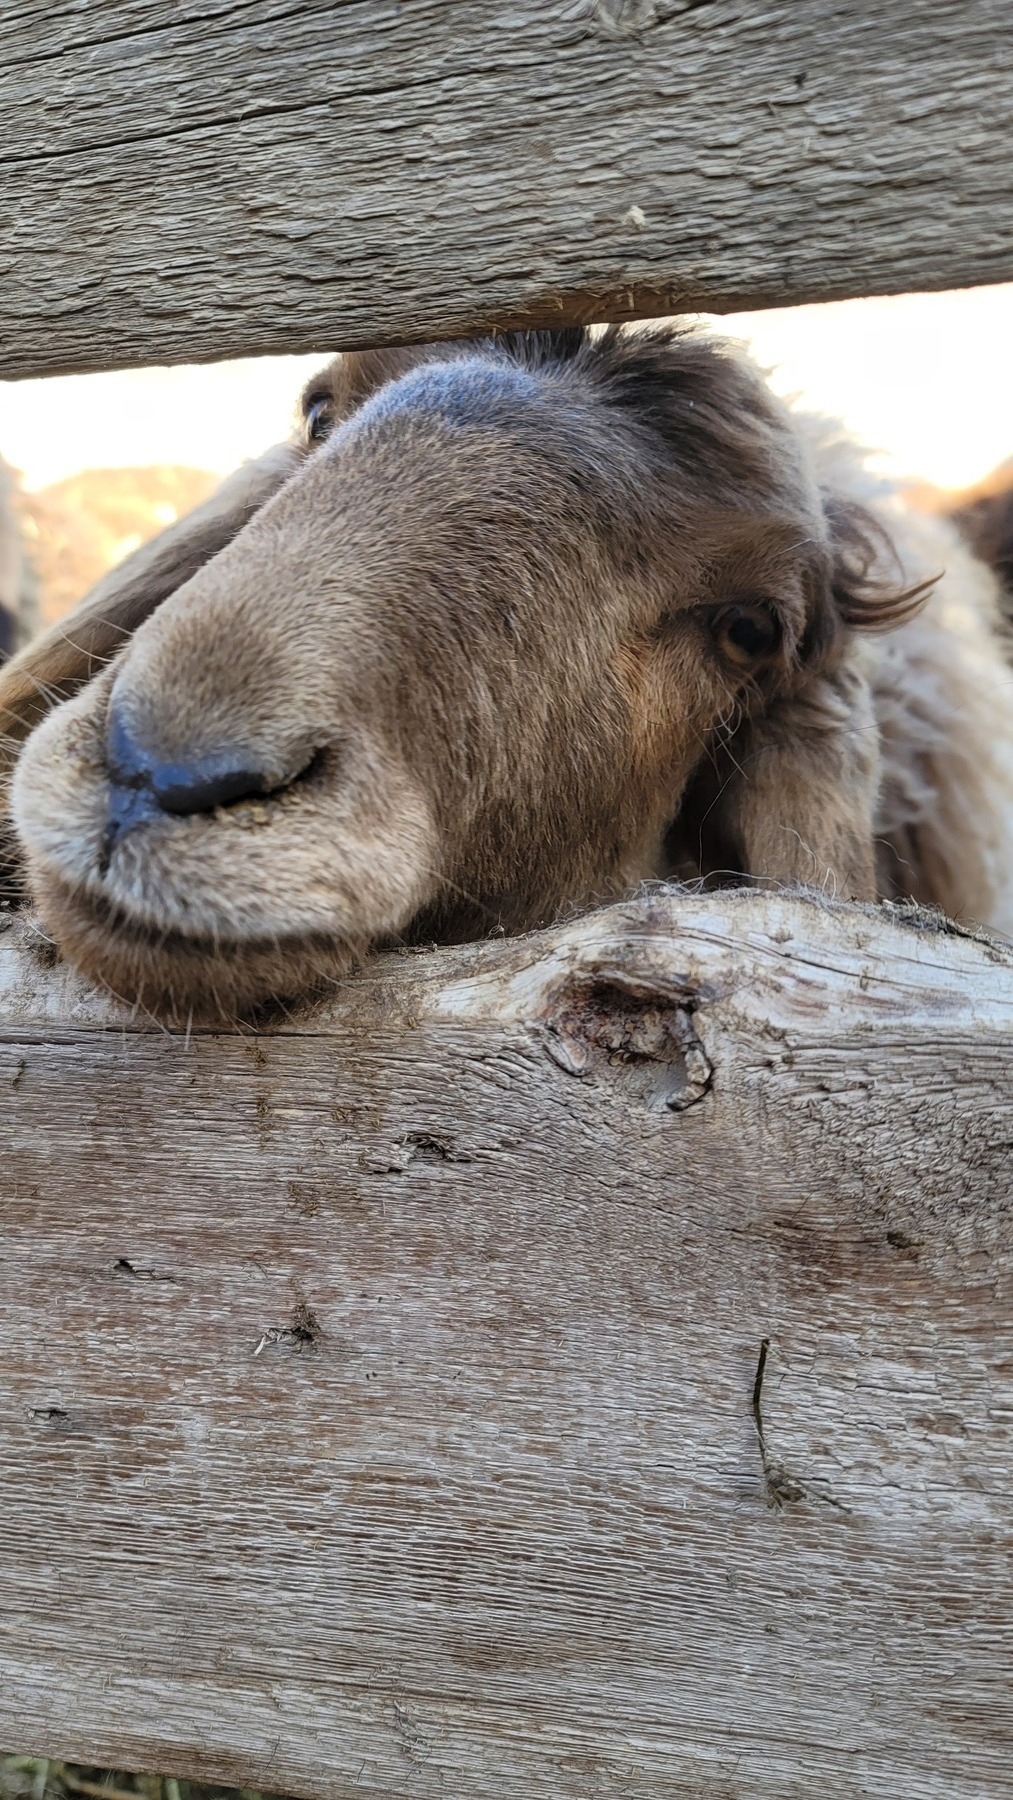 light brown sheep resting its head in the gap between two slats of a wooden fence